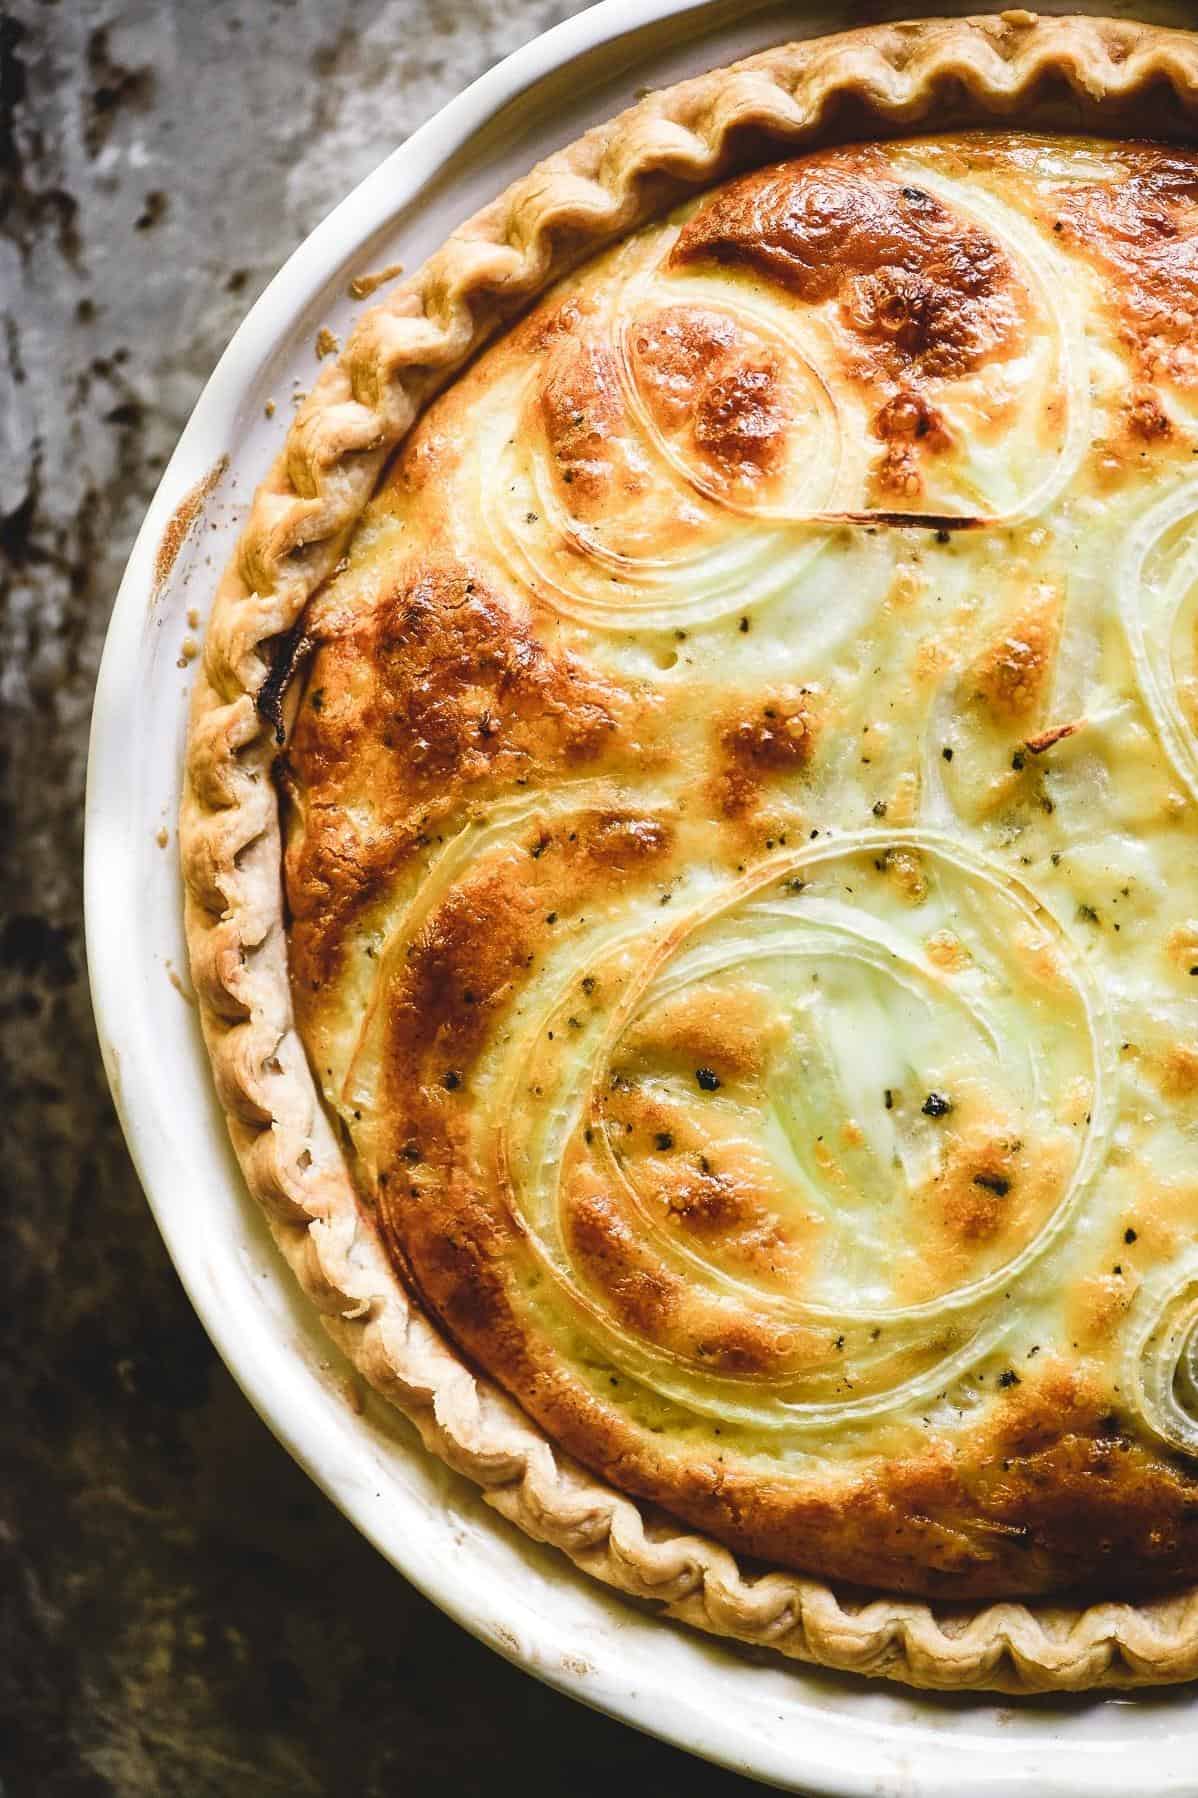  The savory aroma of this onion pie baking will make your mouth water.